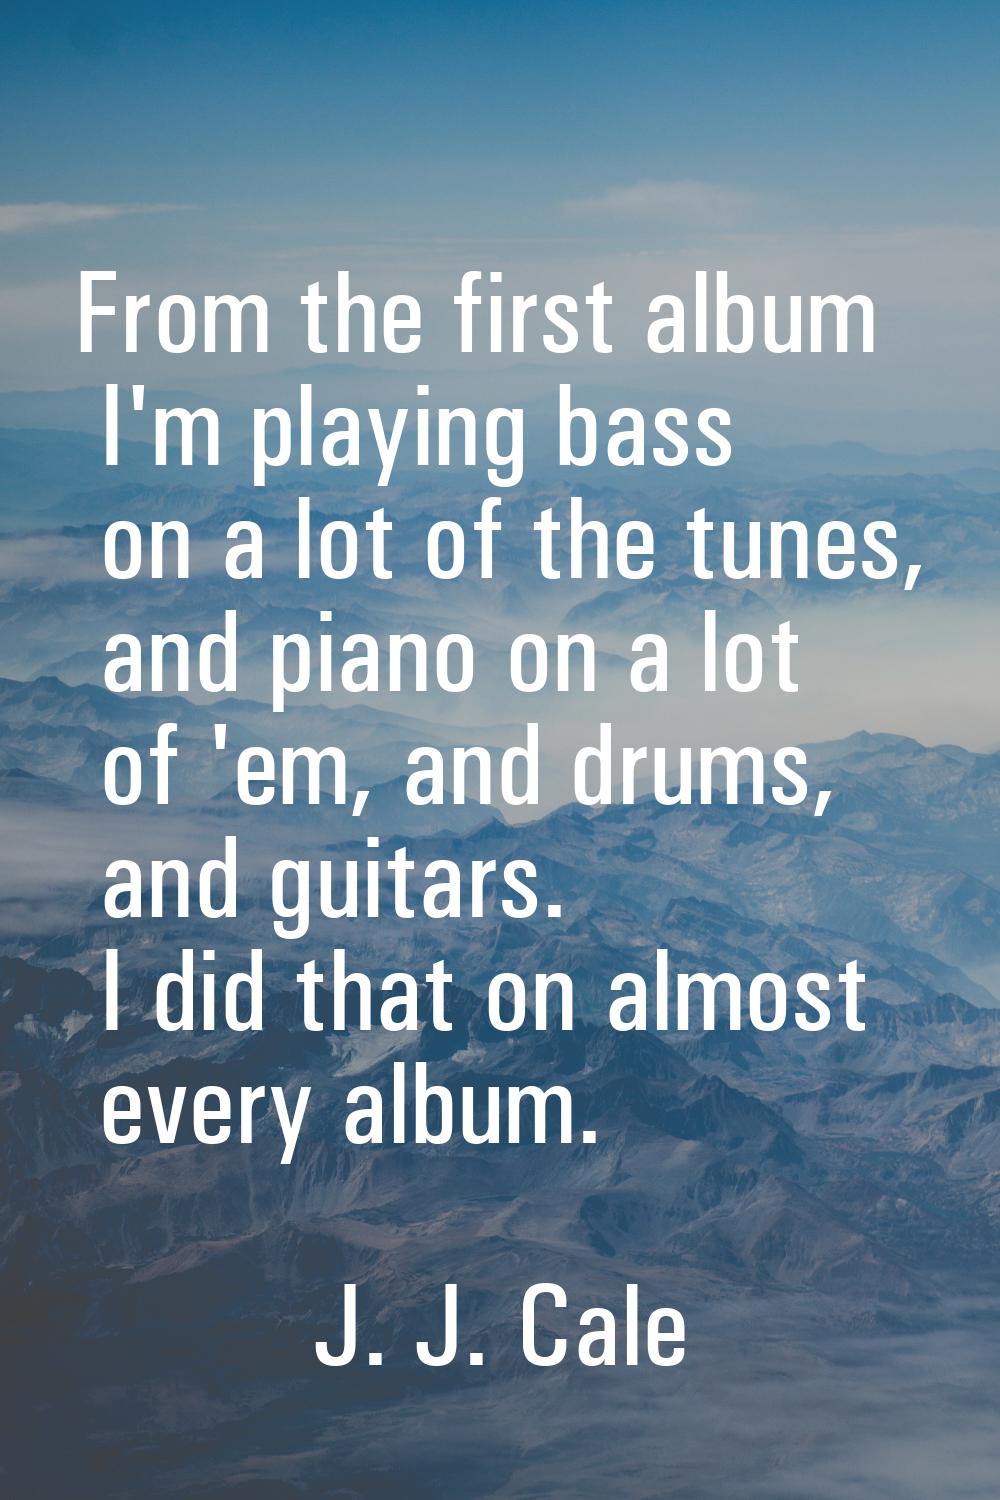 From the first album I'm playing bass on a lot of the tunes, and piano on a lot of 'em, and drums, 